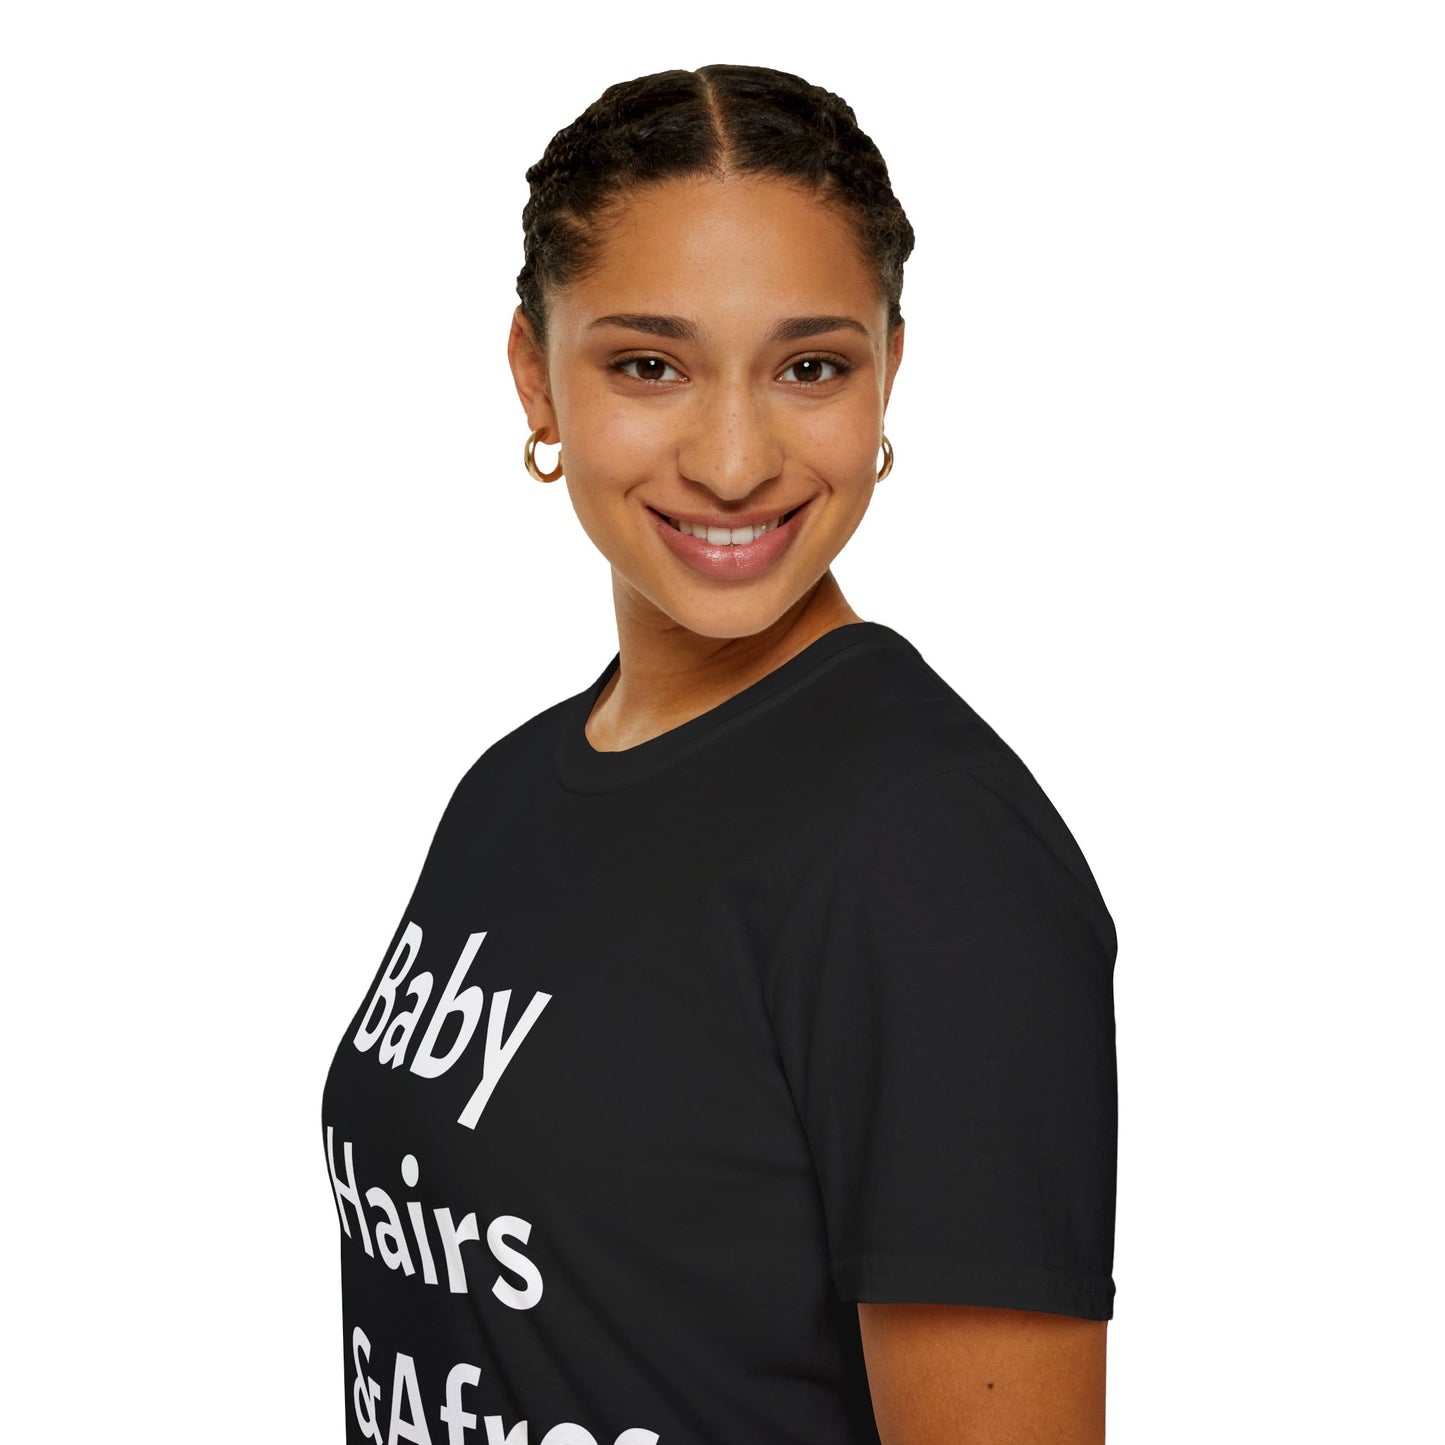 young girl wearing Black T shirt with words "Baby Hairs and Afros " 